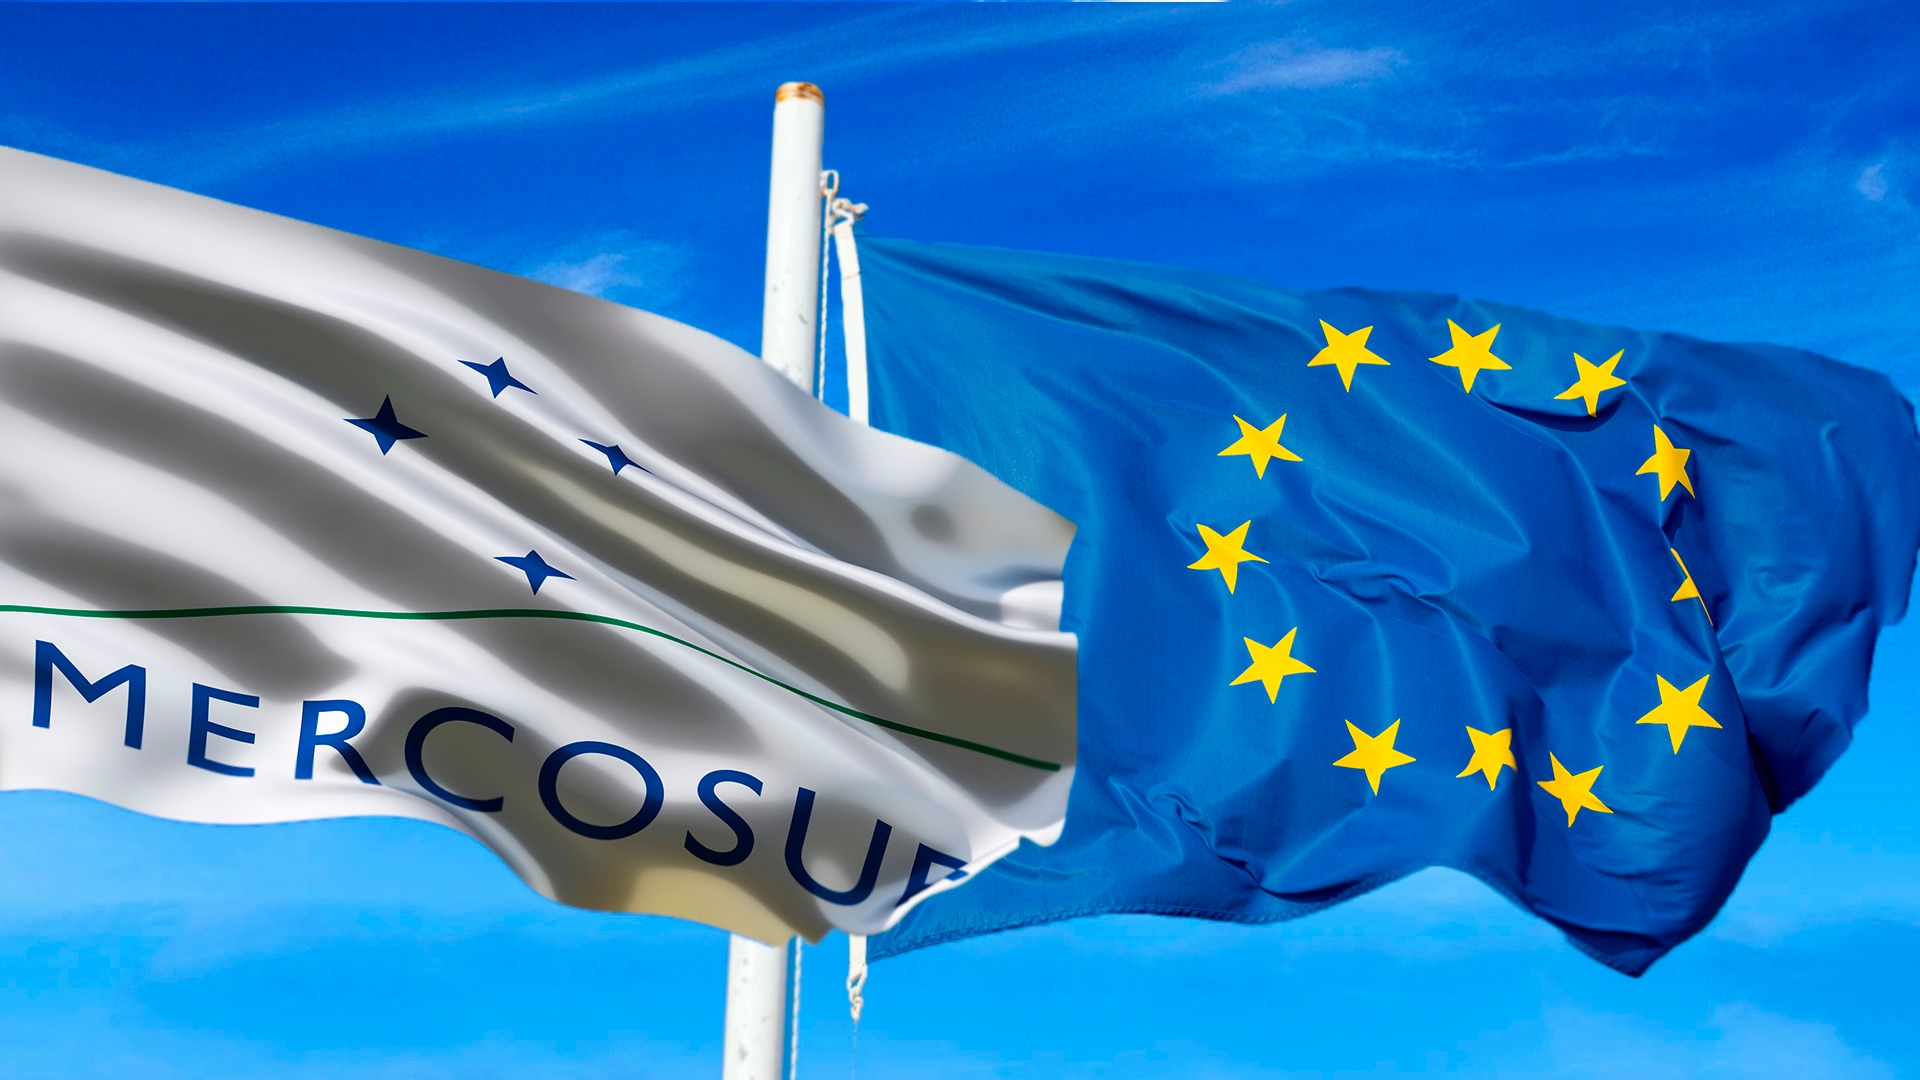 The agreement between the EU and Mercosur remains stalled